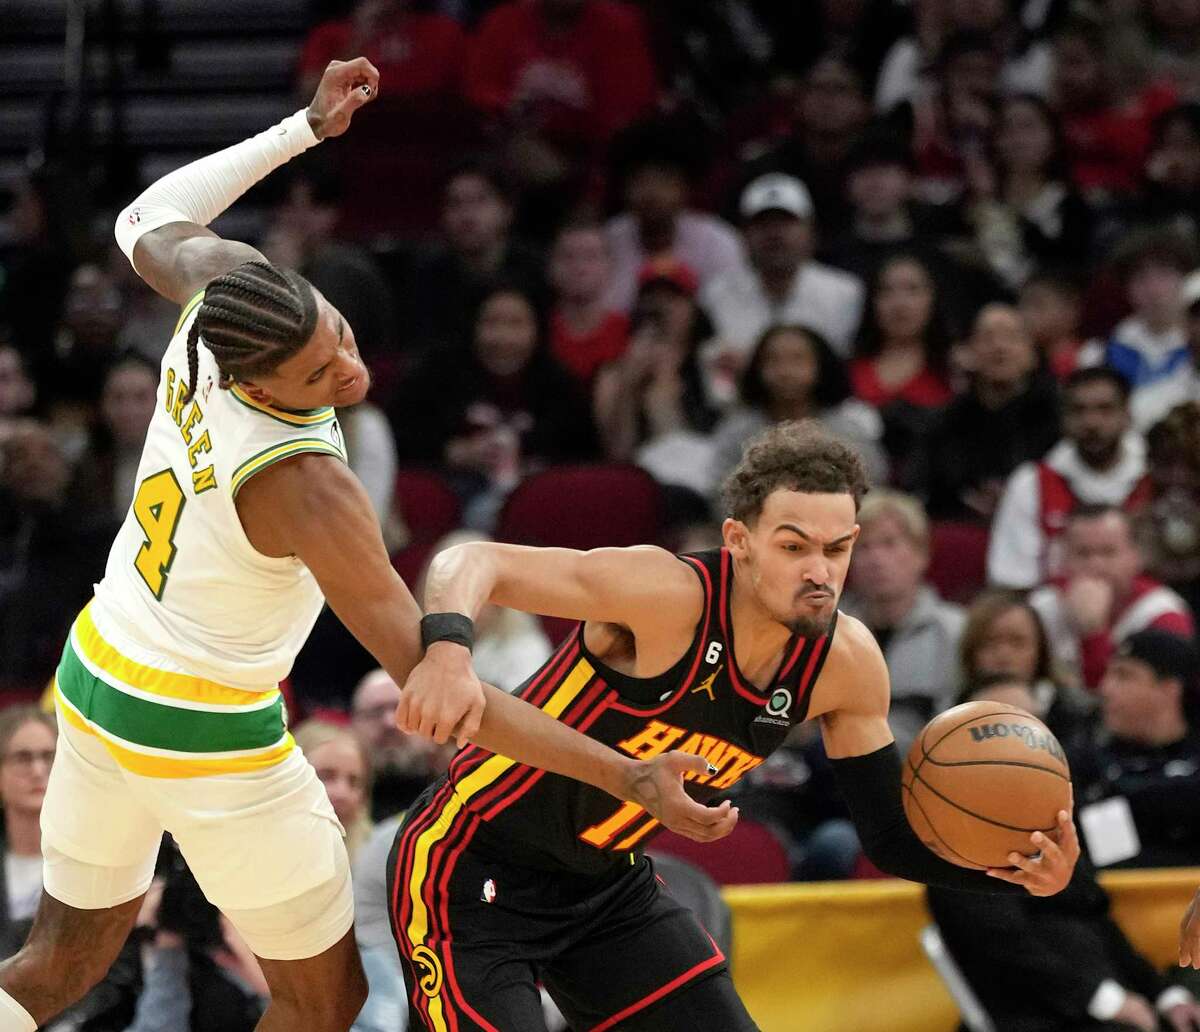 Houston Rockets guard Jalen Green (4) fouls Atlanta Hawks guard Trae Young (11) during the second half of an NBA basketball game at Toyota Center on Friday, Nov. 25, 2022 in Houston .